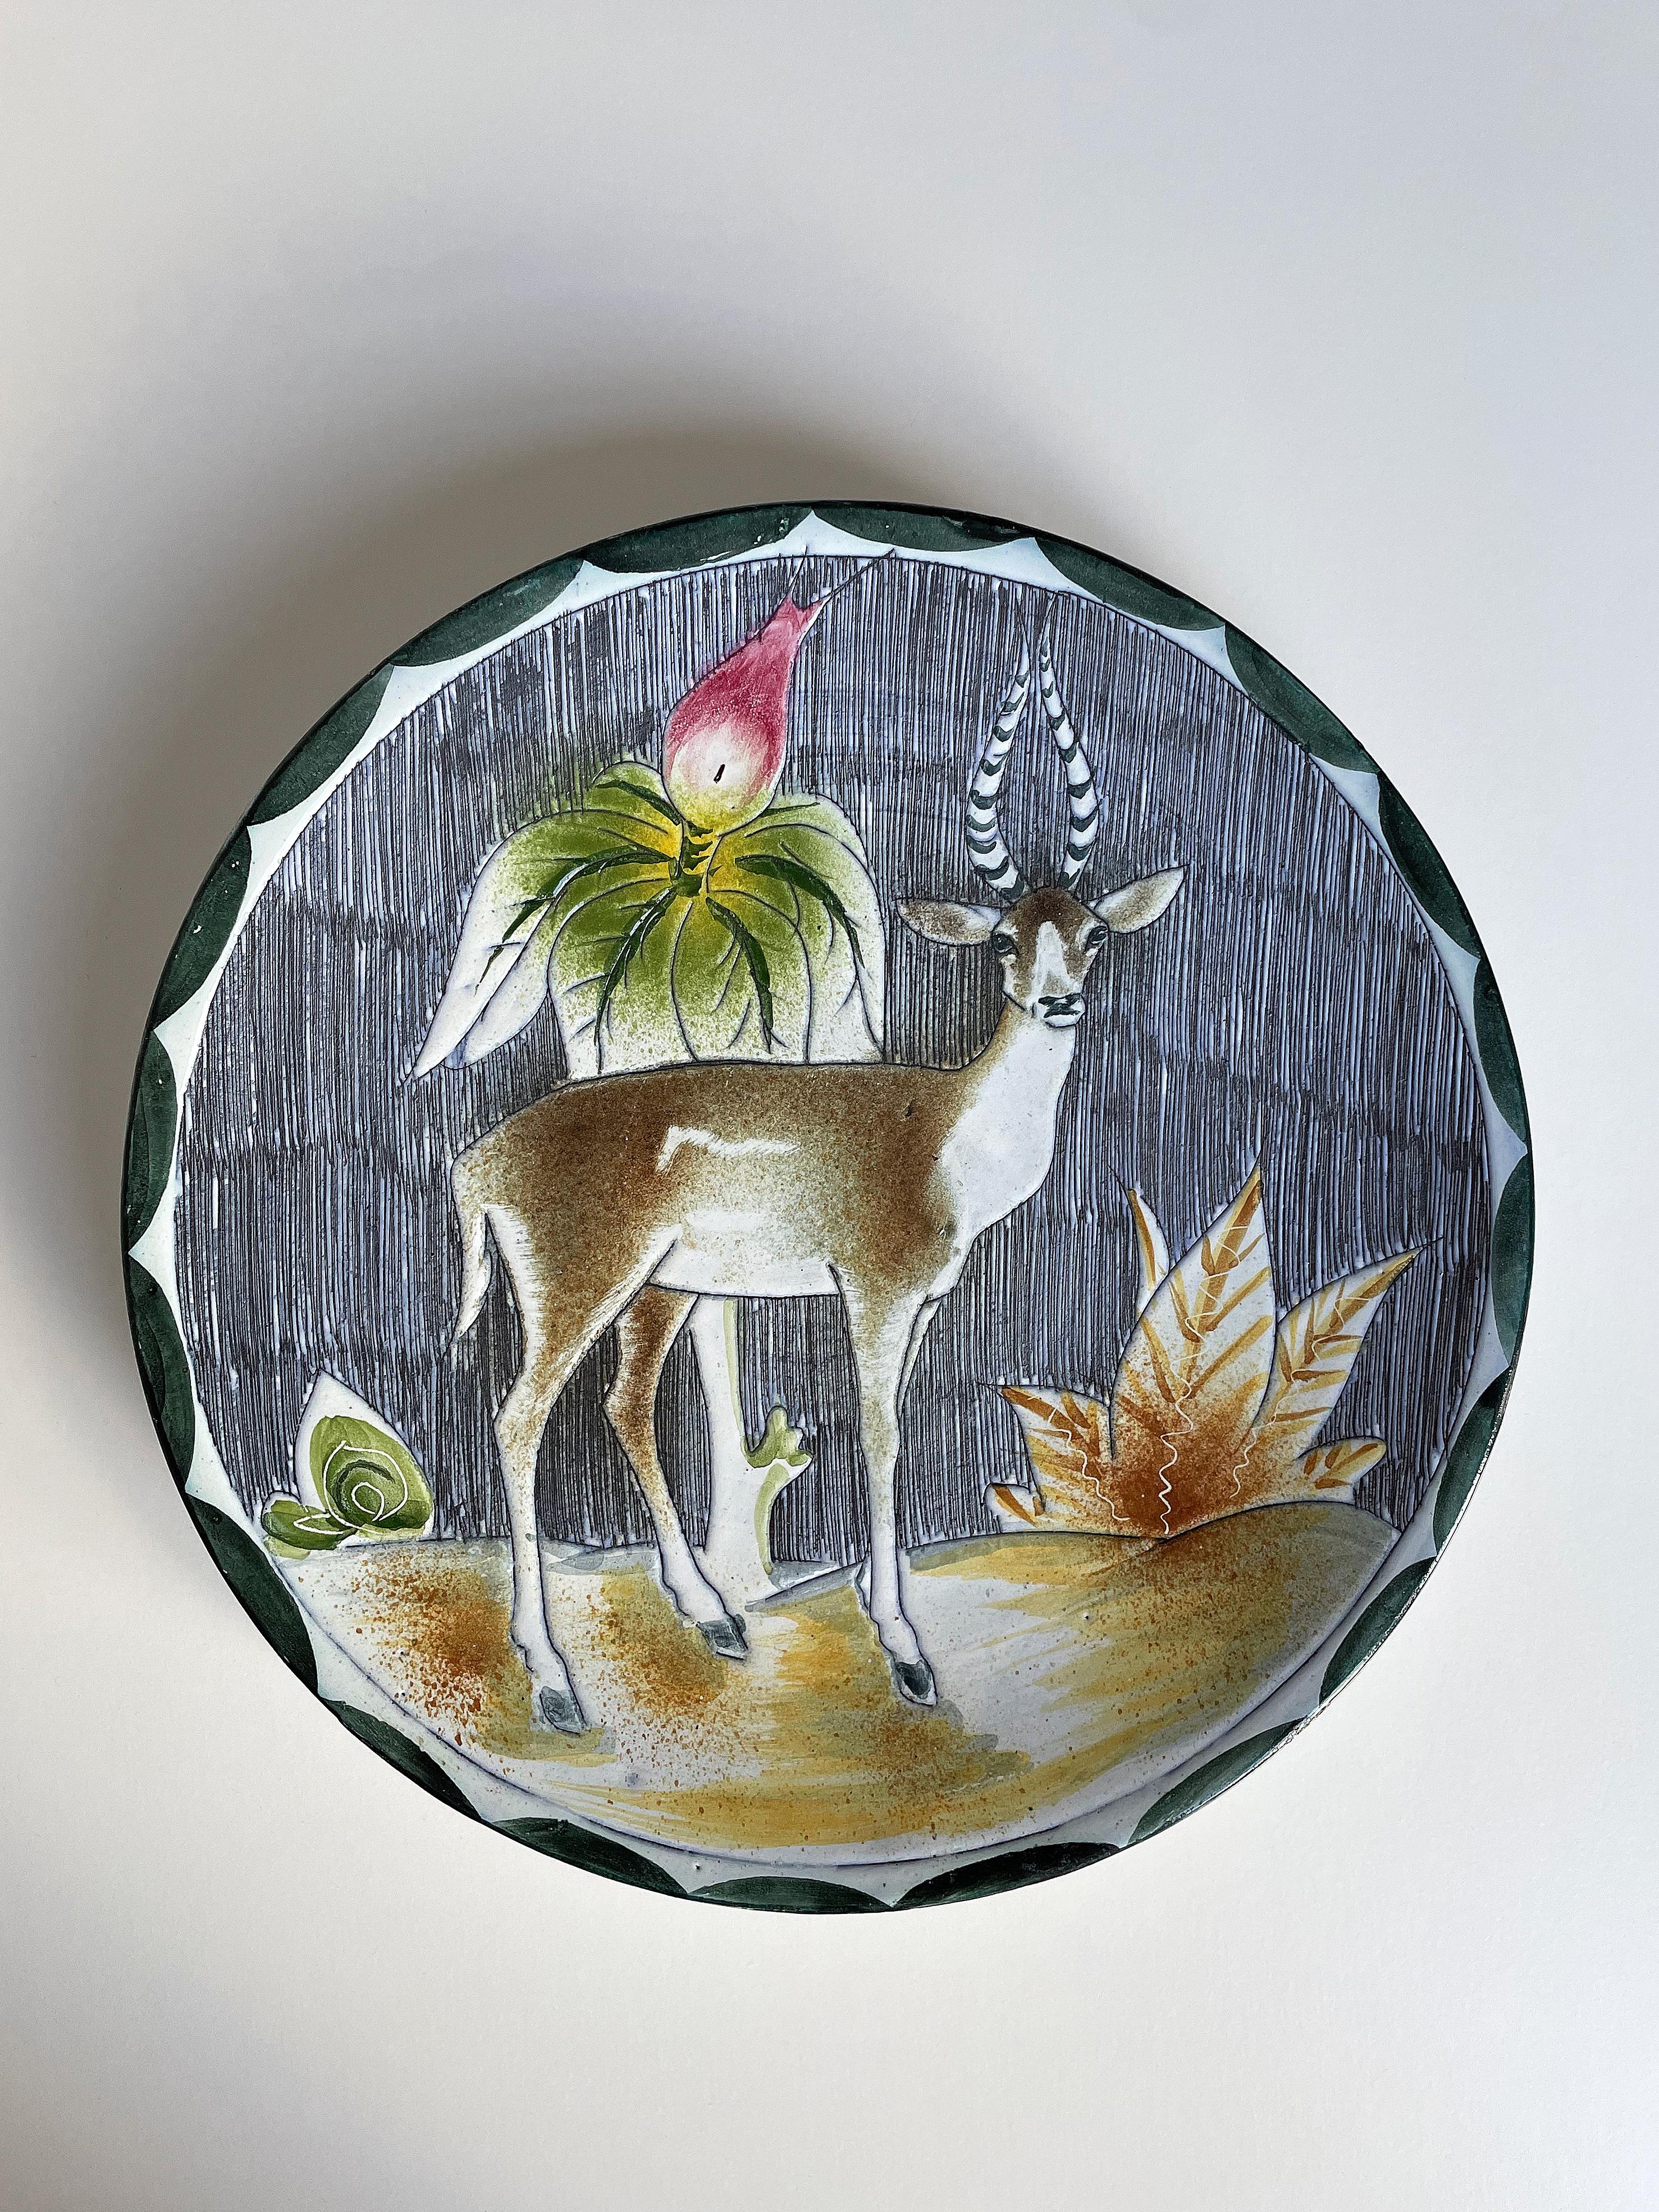 Vintage handmade fully glazed Swedich midcentury modern wall platter / centrepiece with organic, floral decor depicting a gazelle with a direct gaze surrounded by vegetation in brown, ochre, green, white and bright pink colors on a striped dark blue